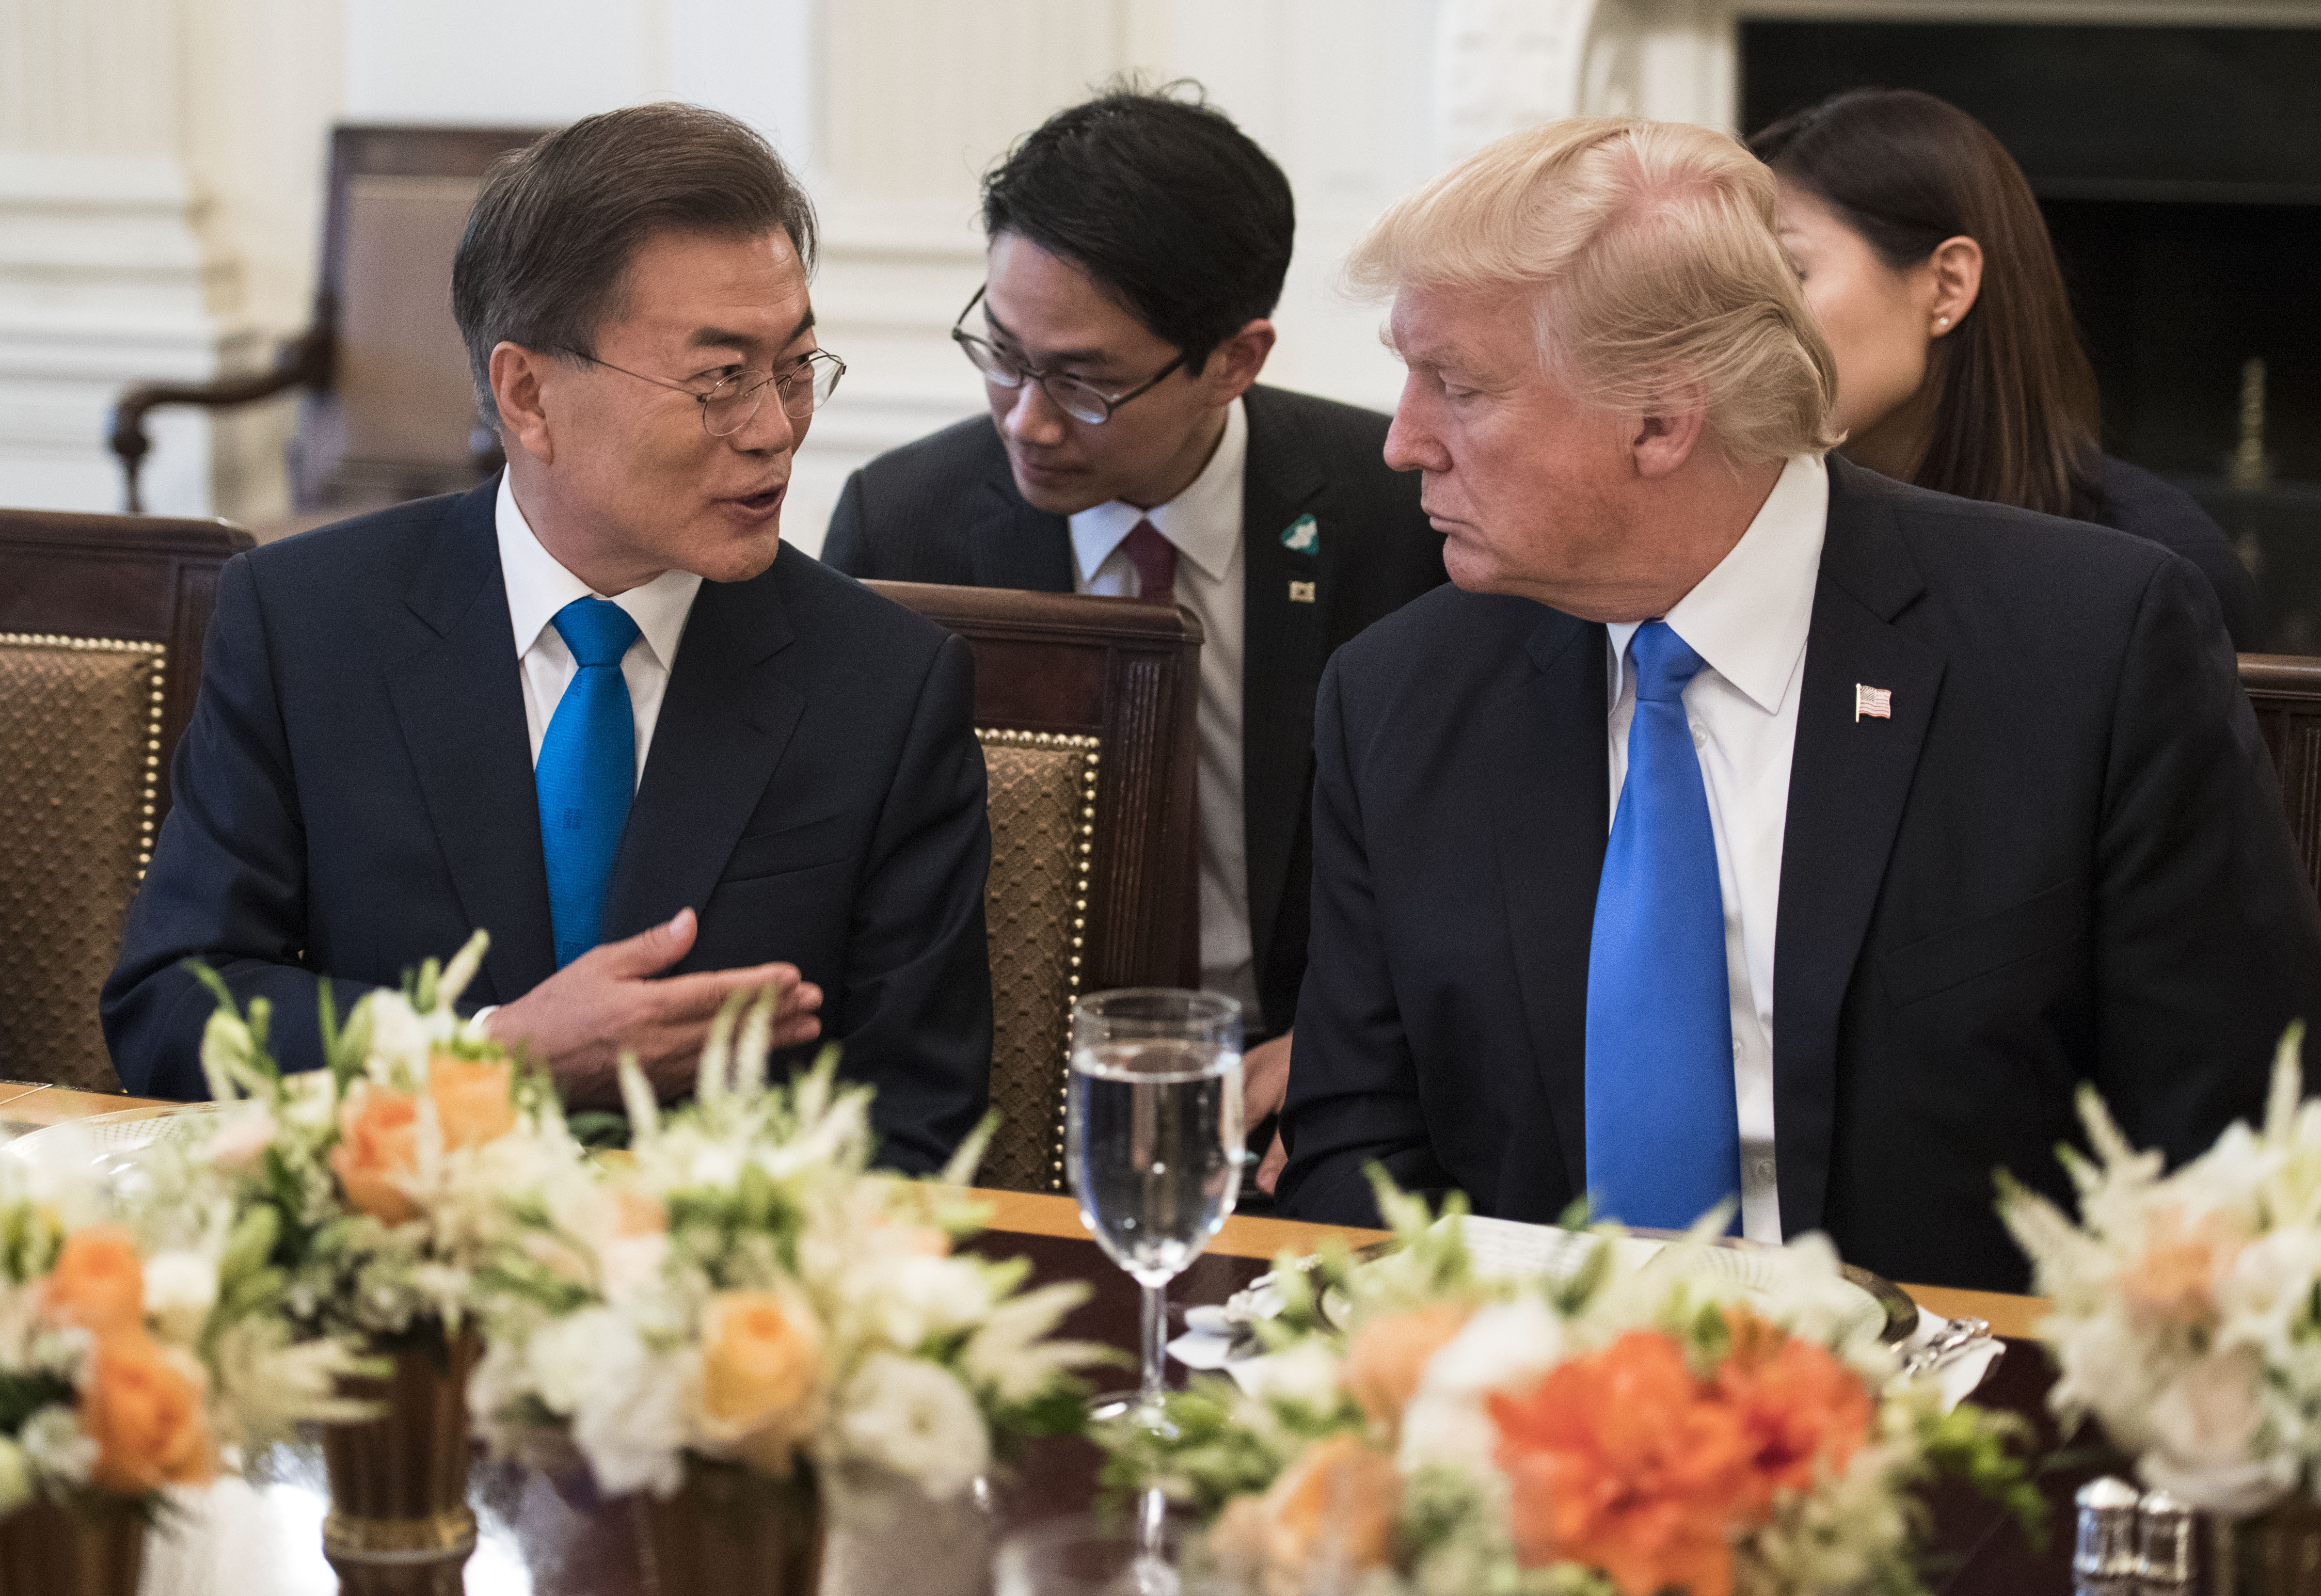 US President Donald Trump and South Korean President Moon Jae-in address the media prior to dinner at the White House June 29, 2017 in Washington, D.C. (Kevin Dietsch—Getty Images)